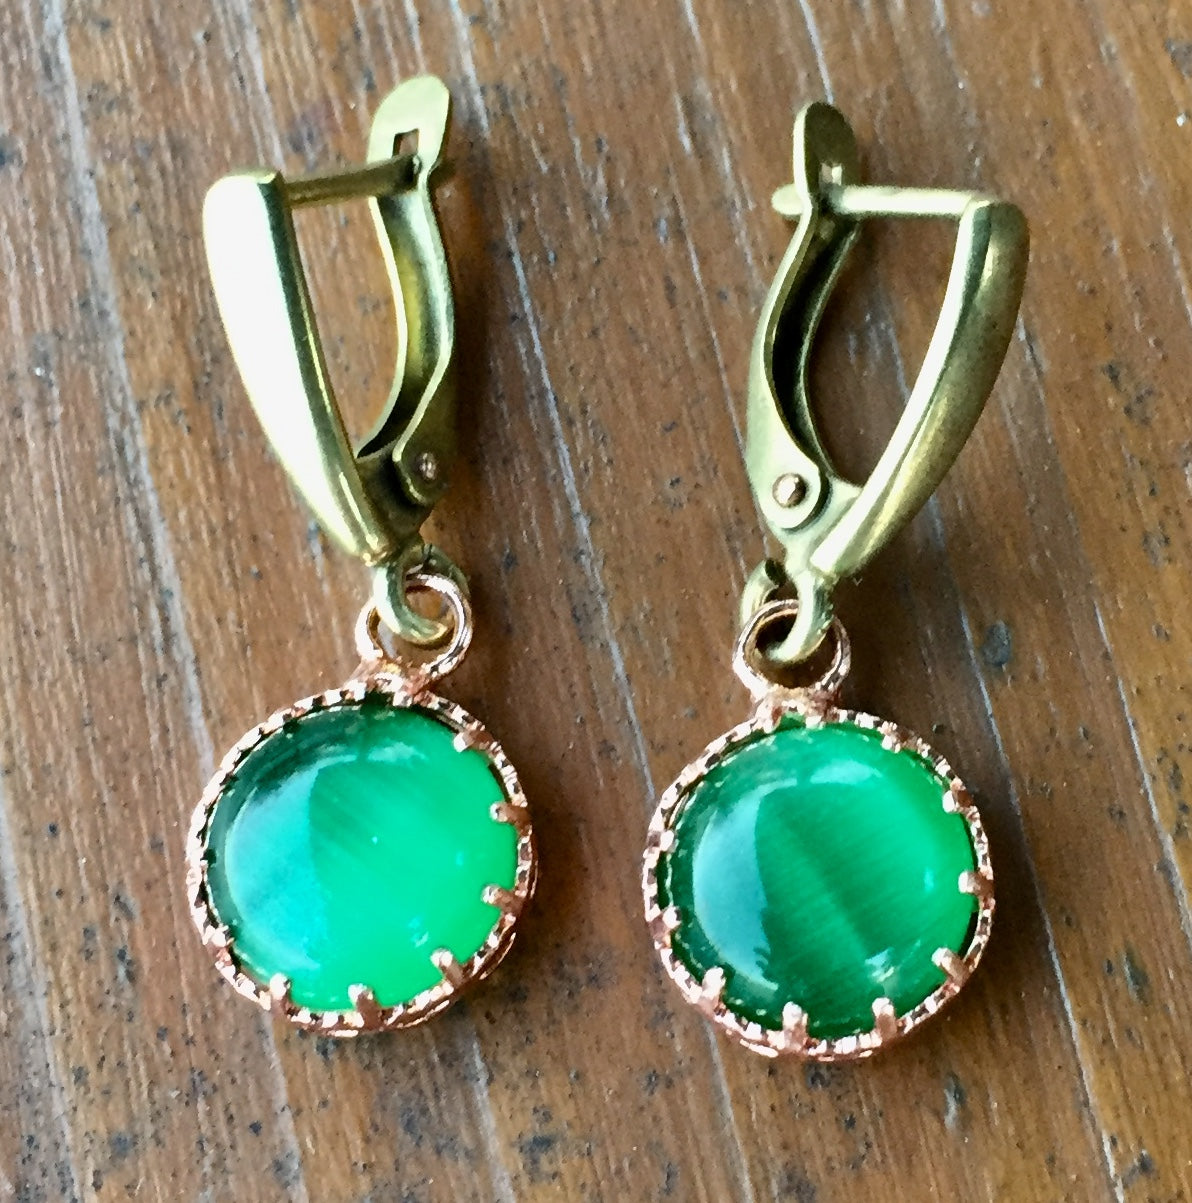 Green Chatoyant Glass and Copper Earrings